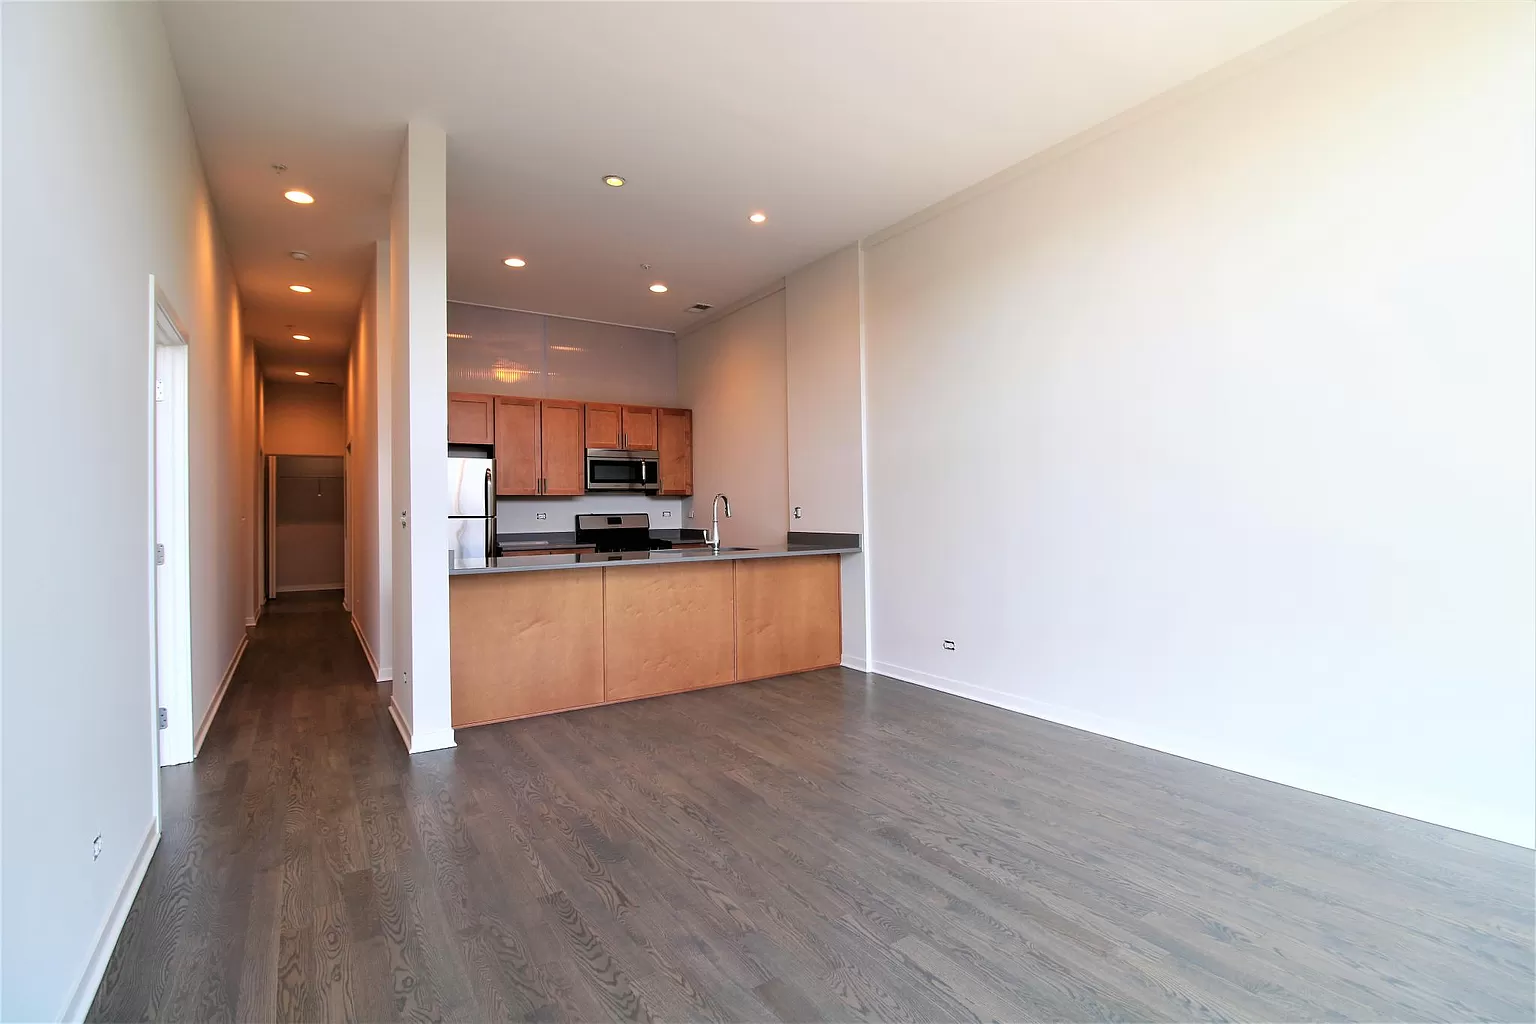 Tribeca Flashpoint Media Arts Academy Housing 2.5 Bed 2 bath apartment - Available for lease takeover or looking for a room mate for Tribeca Flashpoint Media Arts Academy Students in Chicago, IL